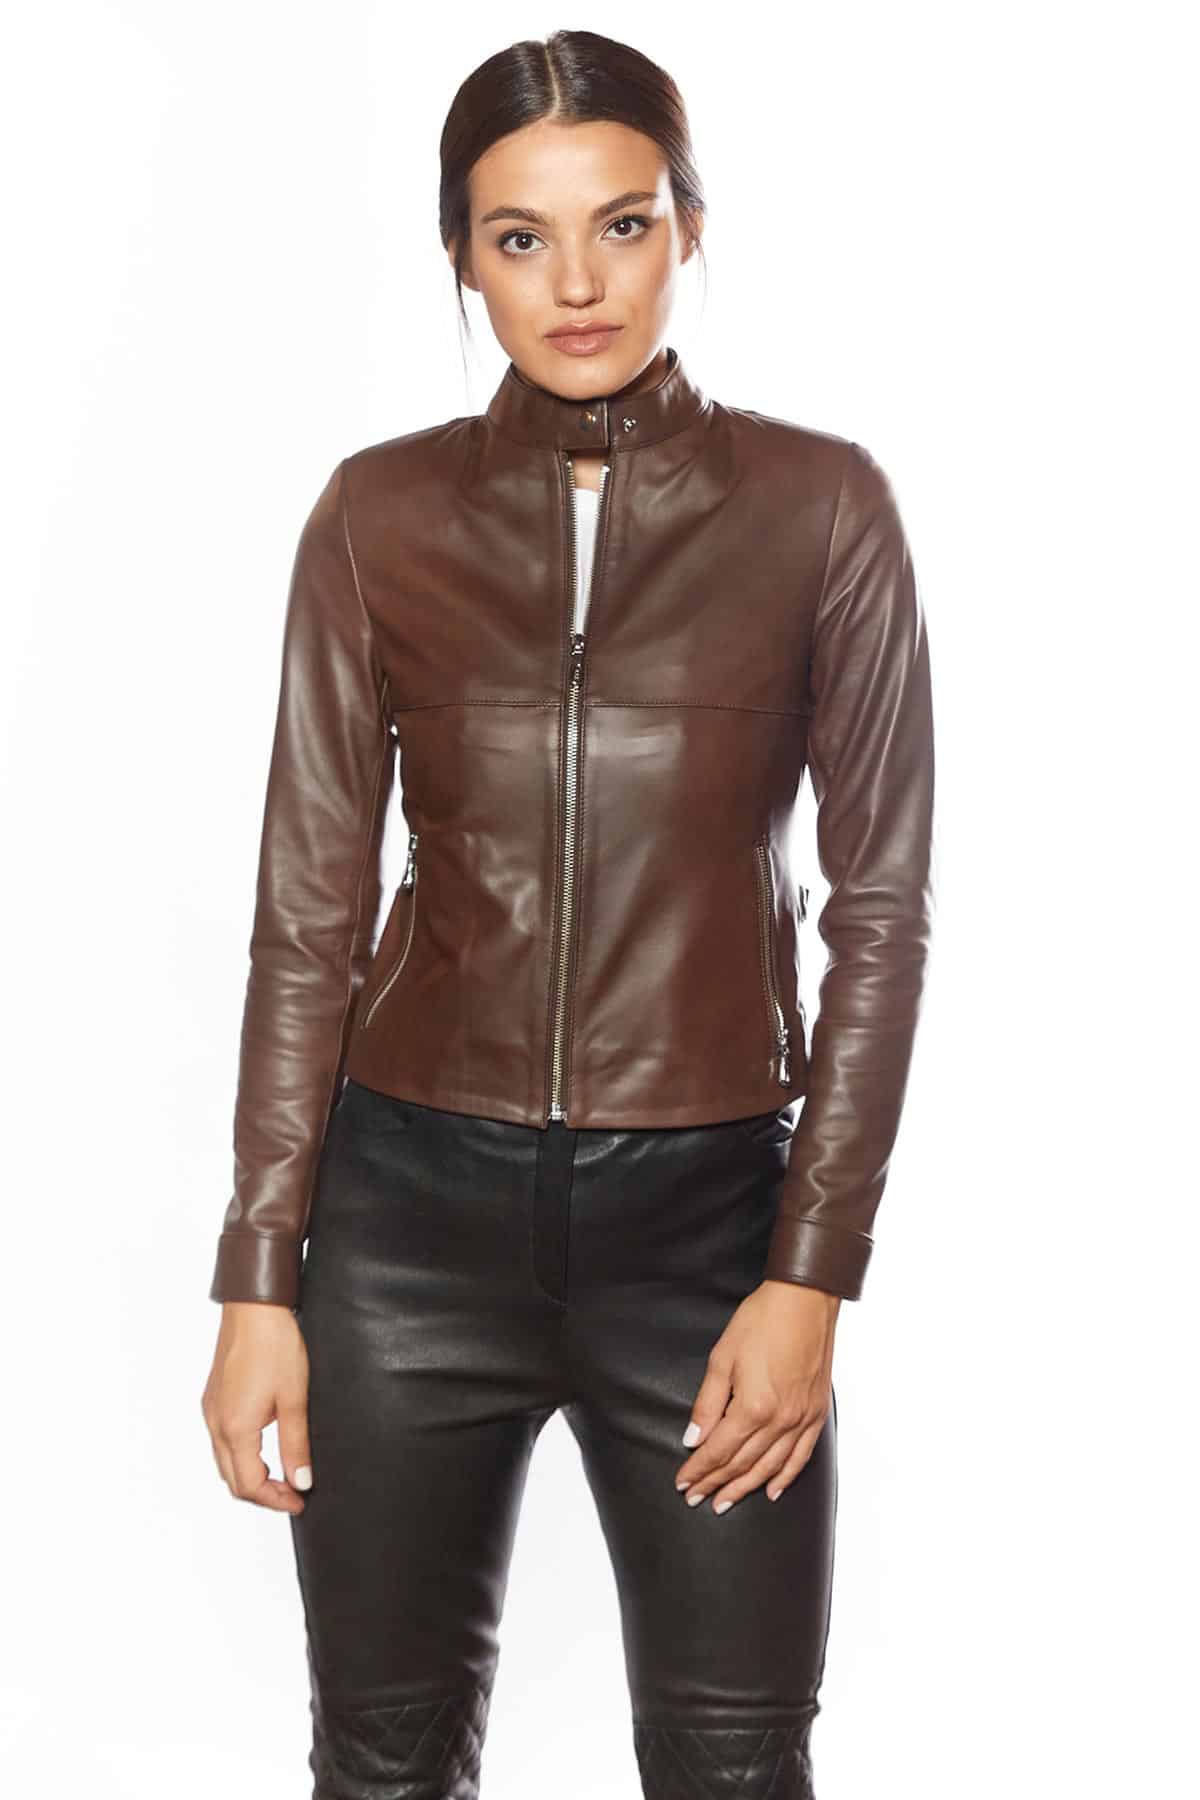 Zara Leather Outer Shell Coats, Jackets & Vests for Women for sale | eBay